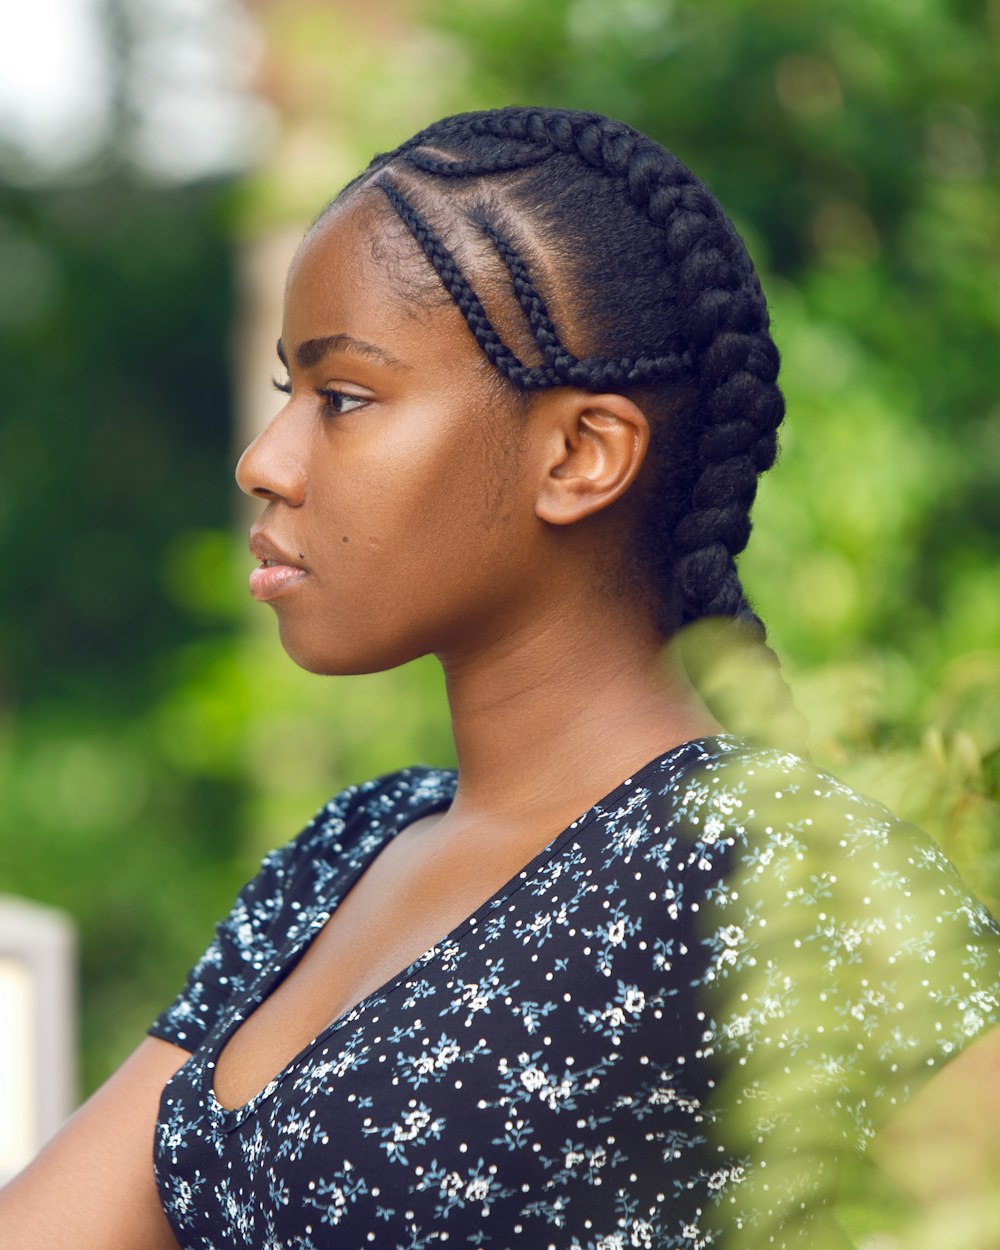 a woman with braids is looking away from the camera